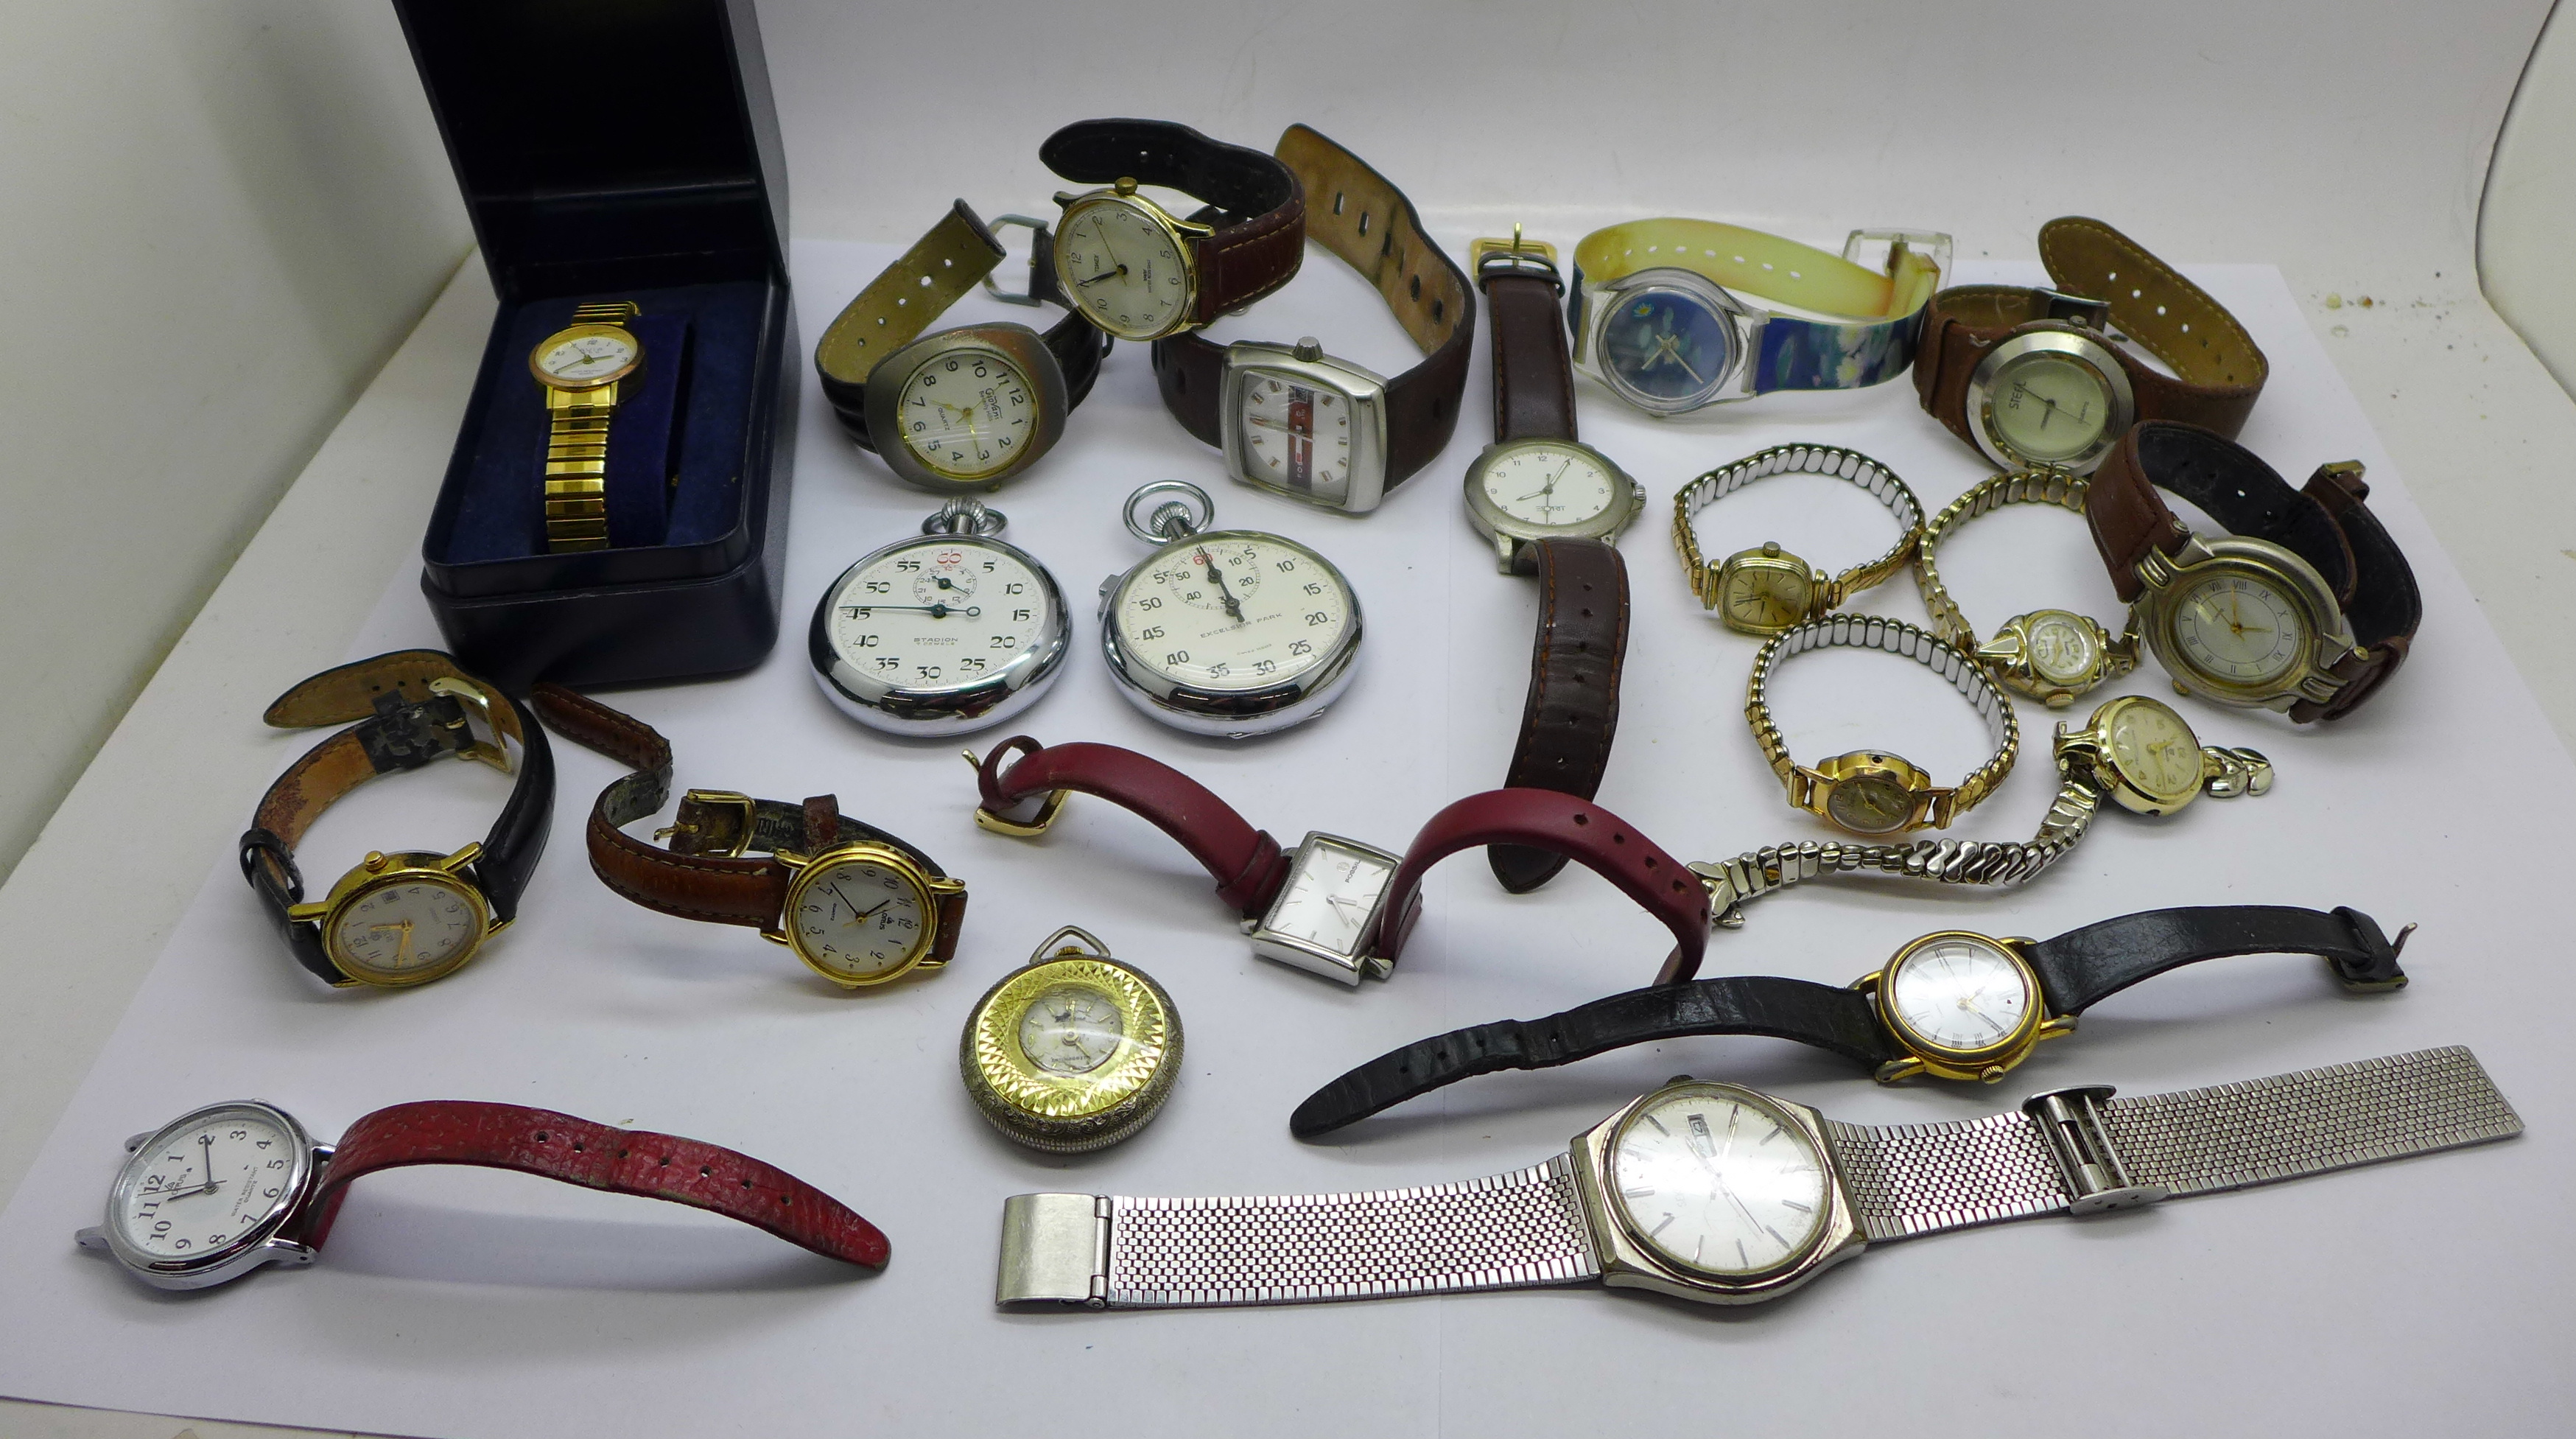 Wristwatches, a stop-watch and a pocket watch